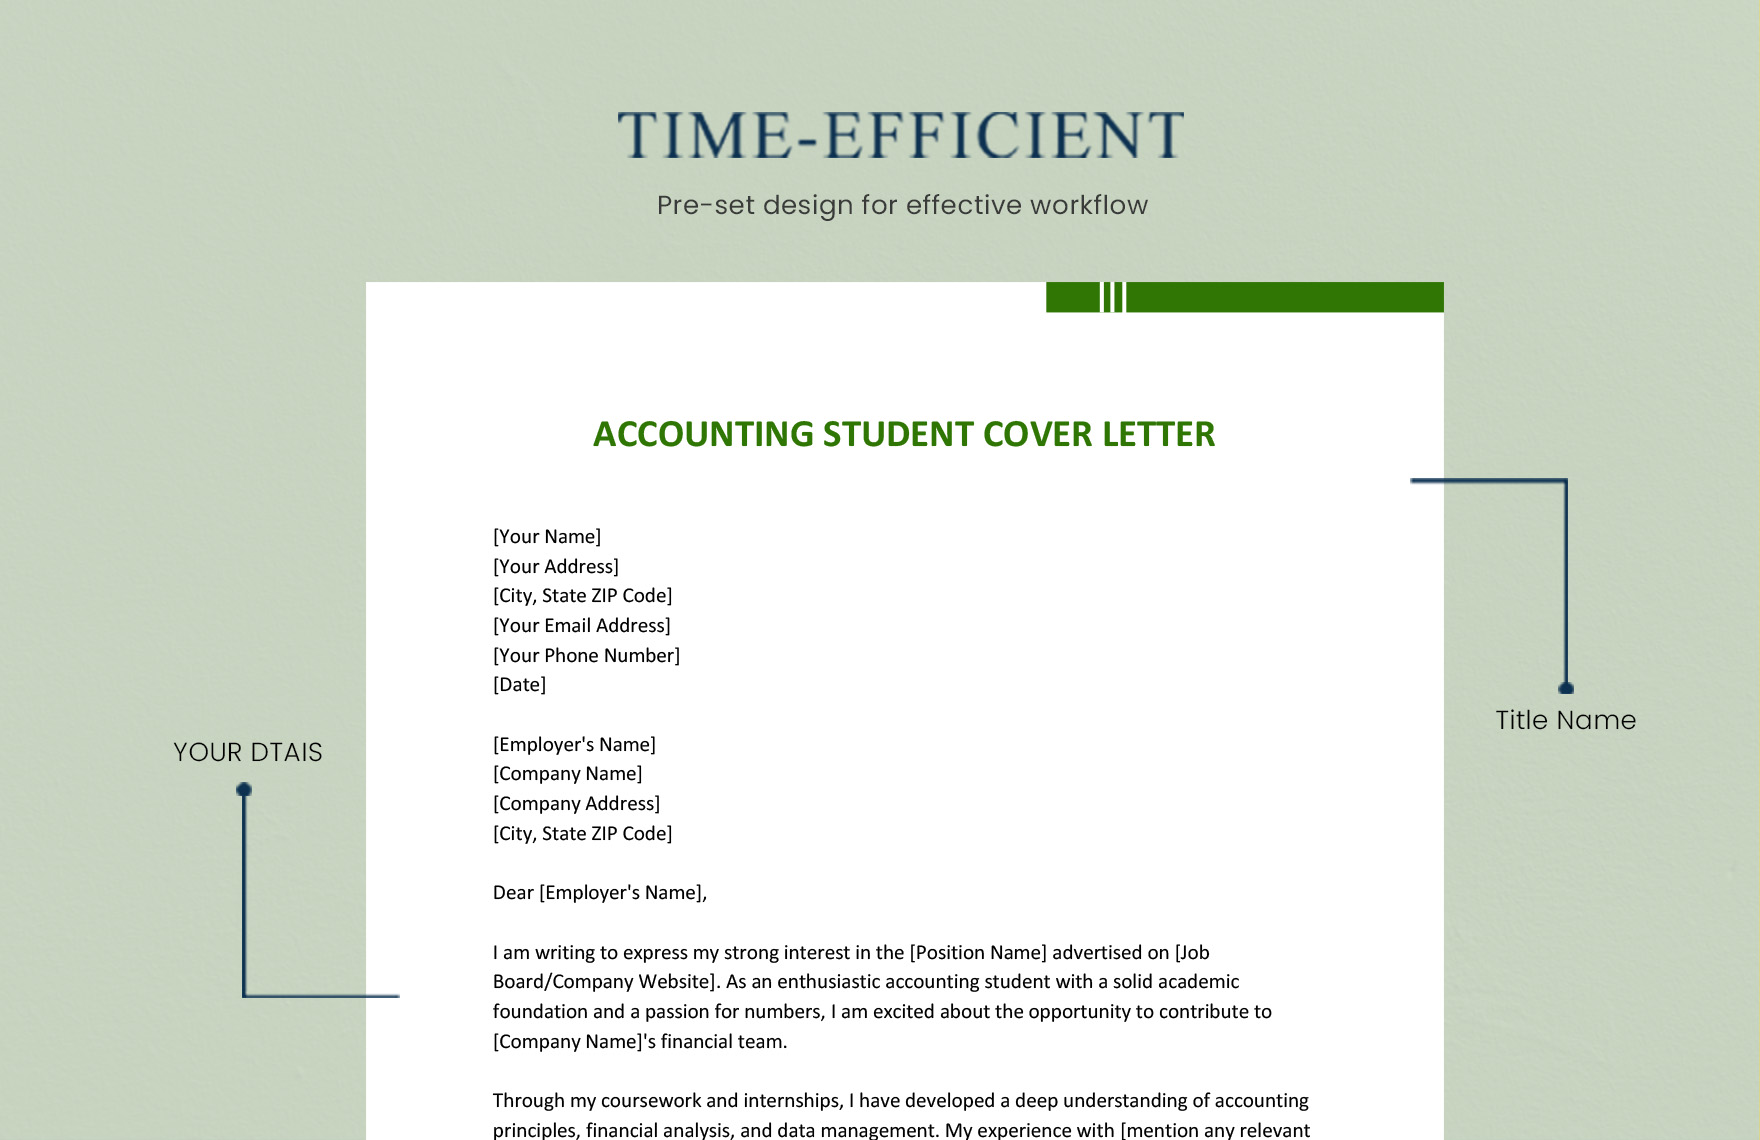 Accounting Student Cover Letter